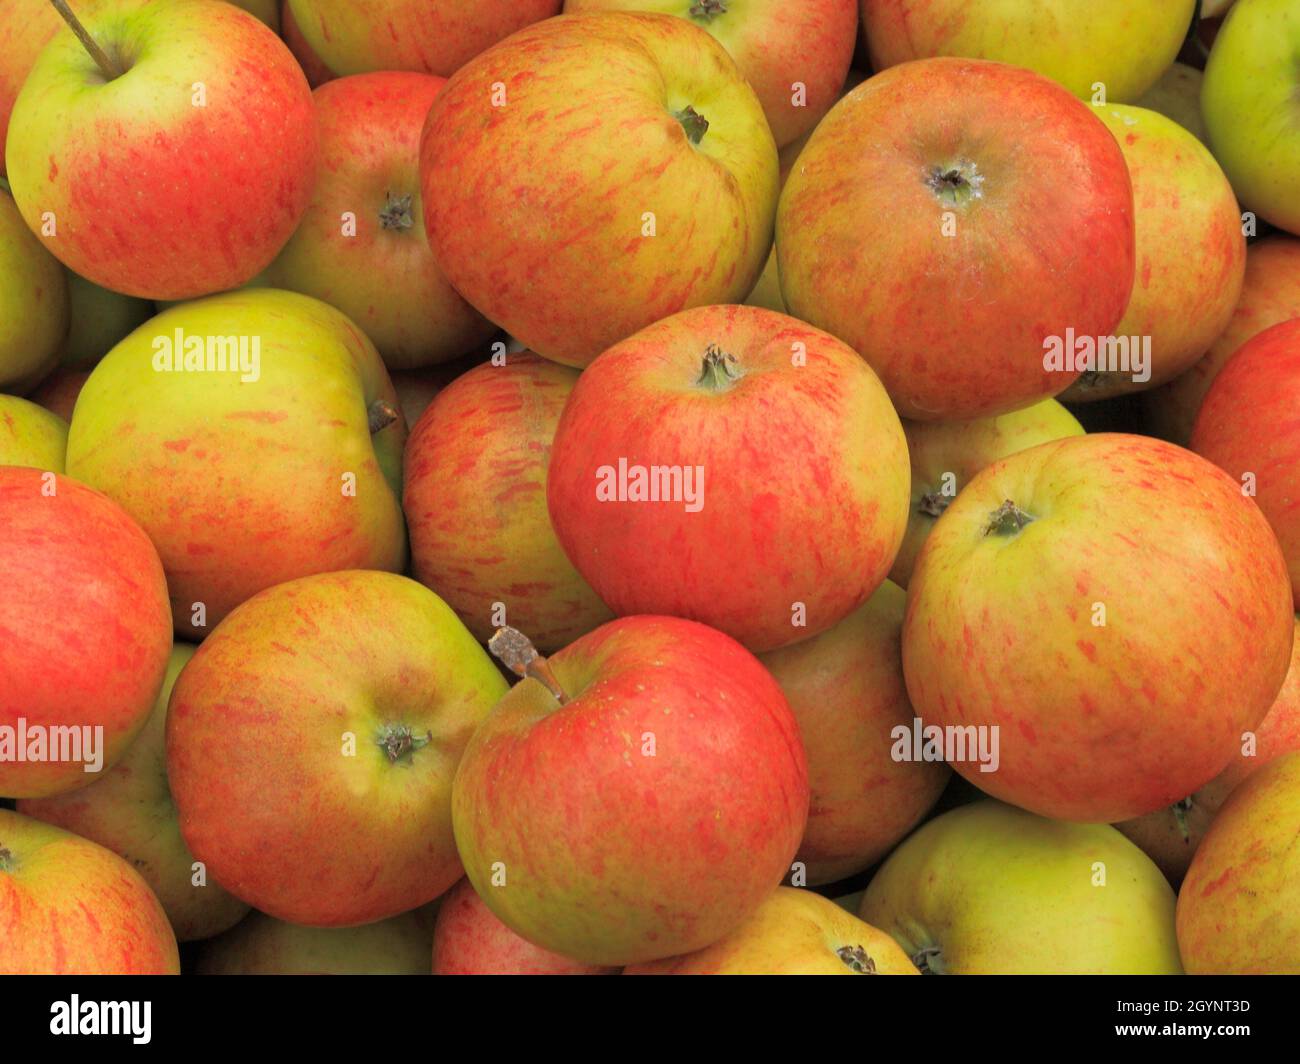 Apple, apples, 'Lynns Pippin', malus domestica, fruit, healthy eating, farm shop, display, malus domestica Stock Photo